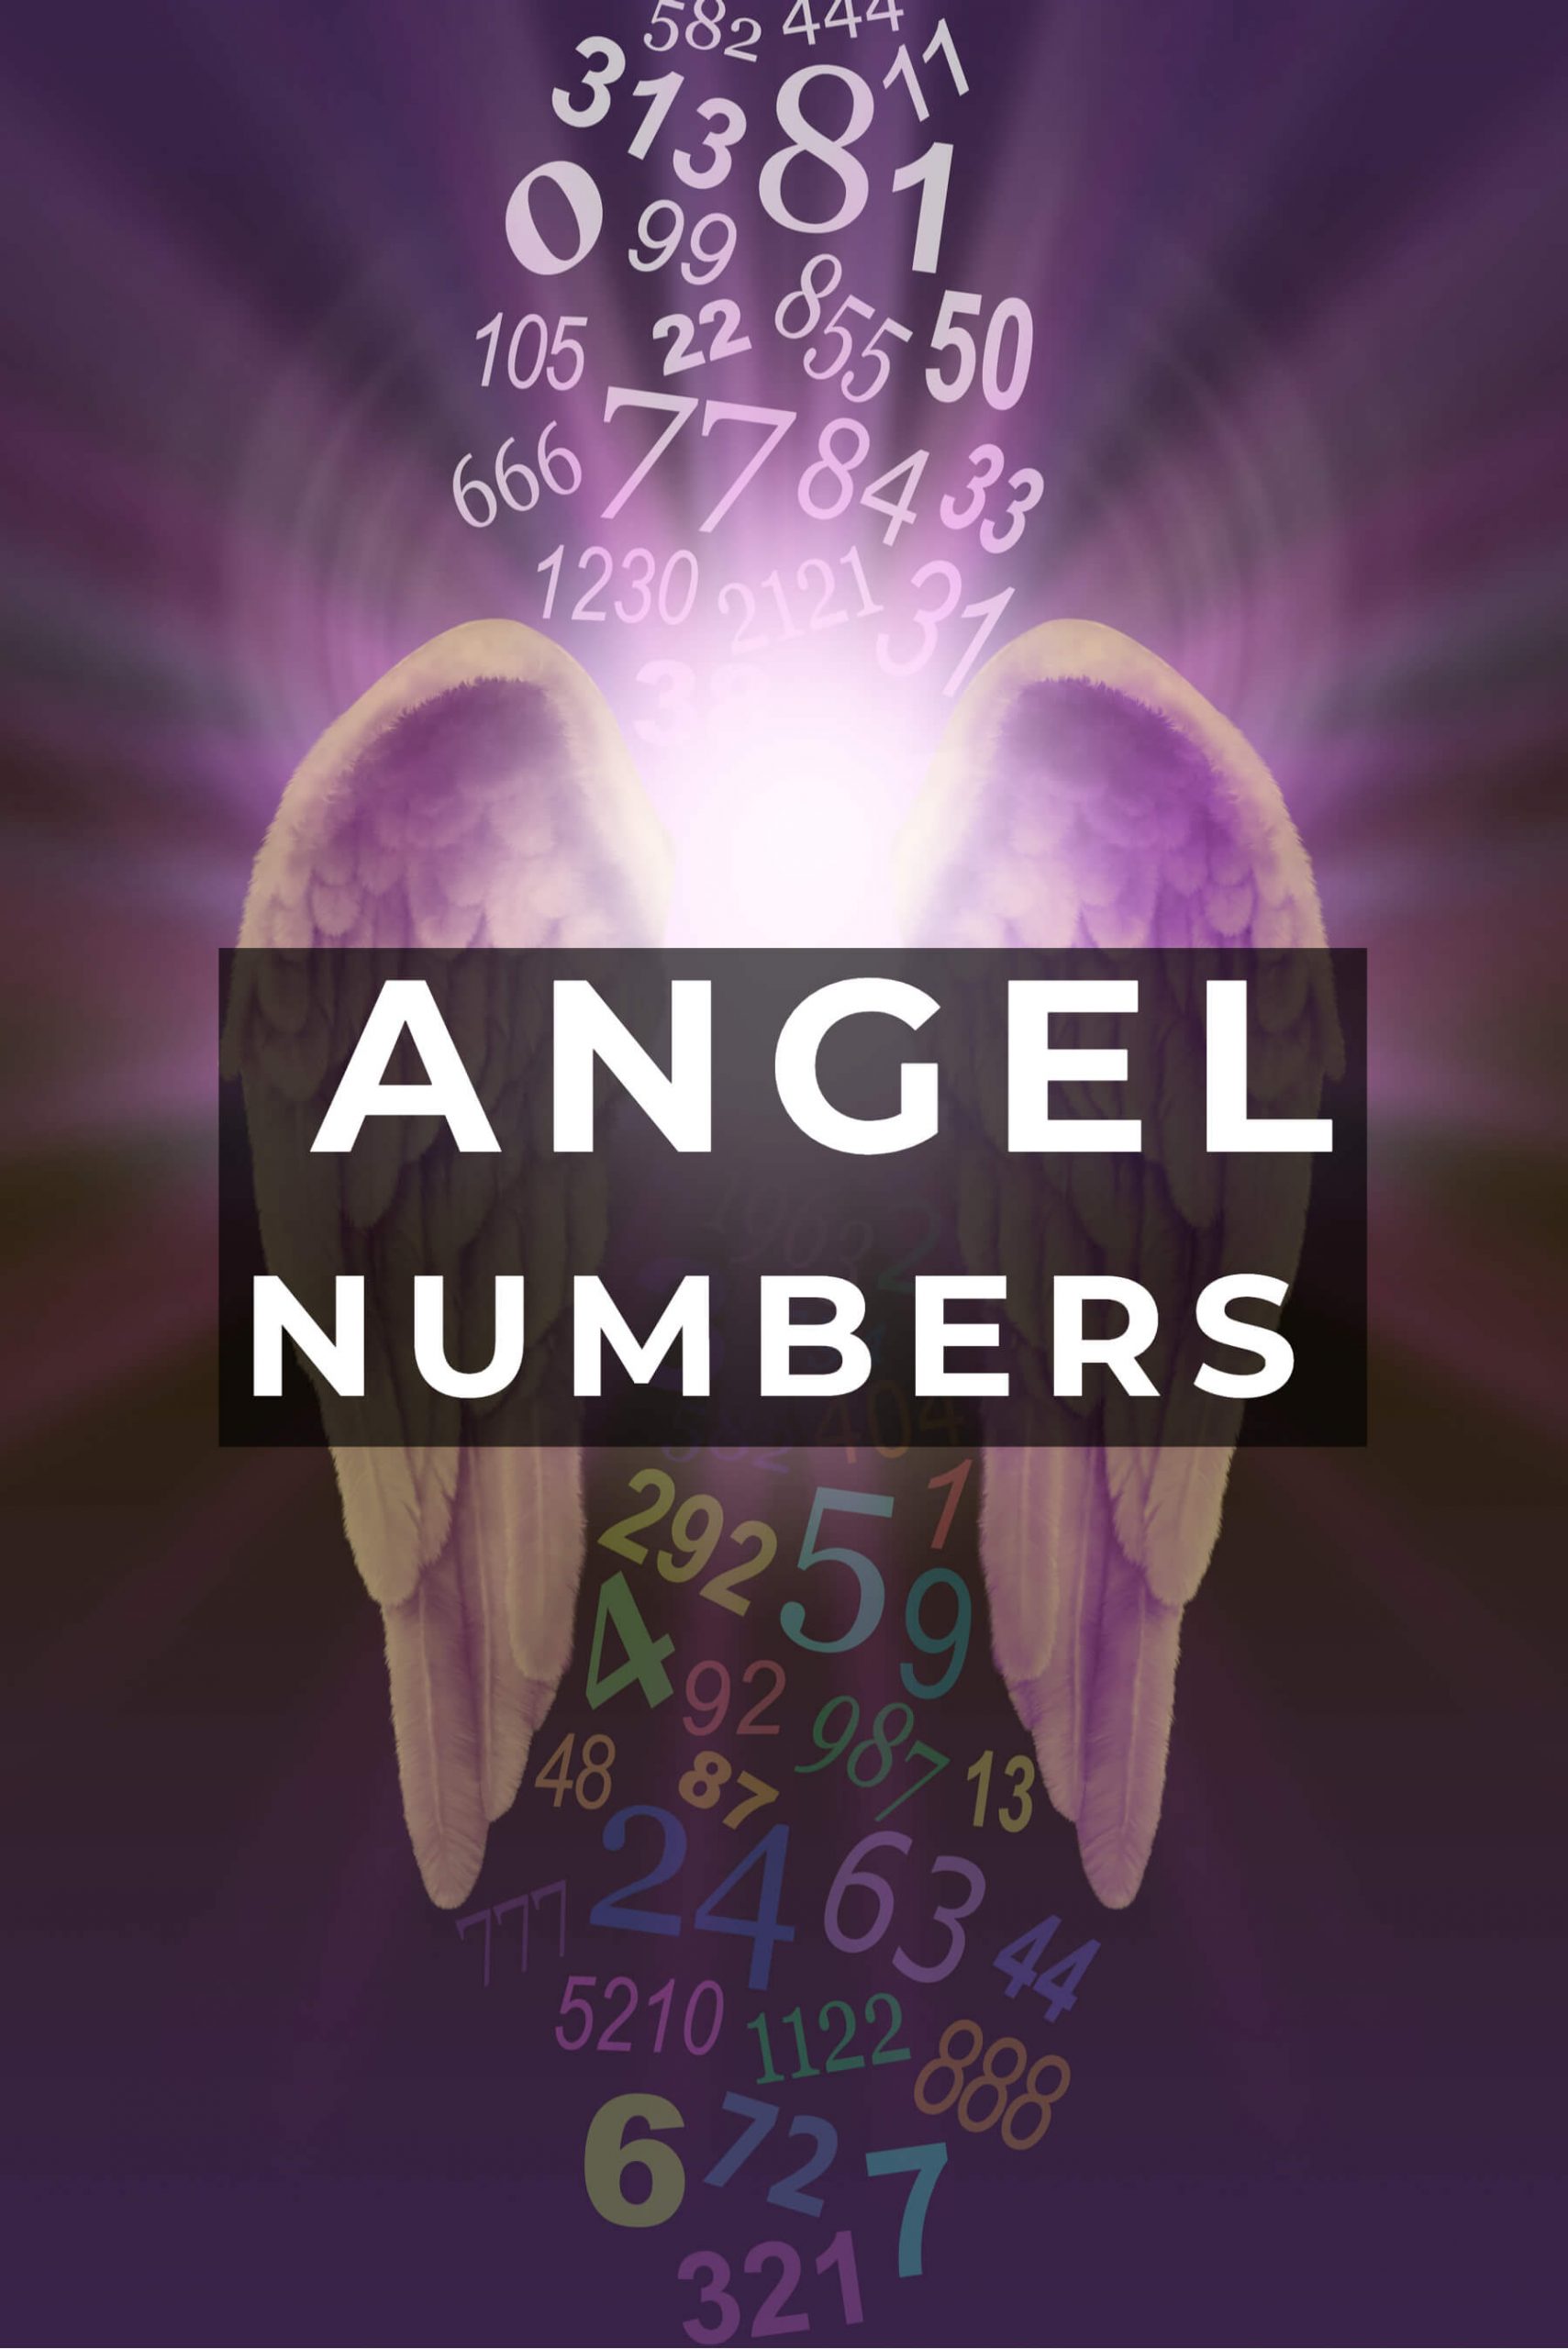 A graphic of angel wings against a purple background with numbers all around. Text overlay reads "angel numbers"